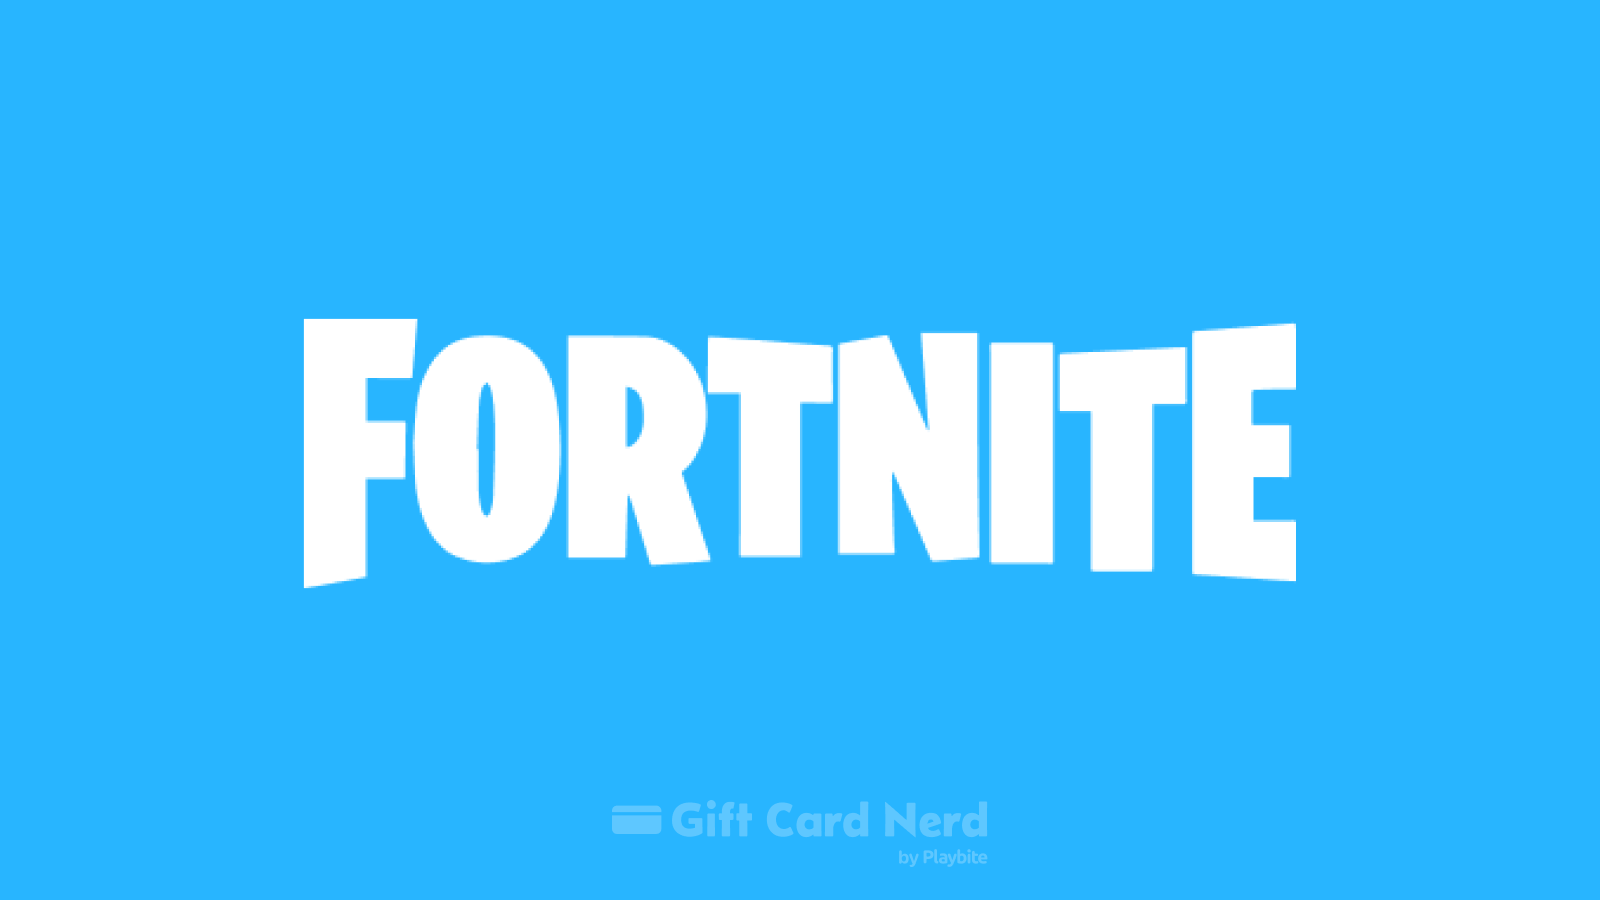 Can I use a Fortnite gift card on Roblox?